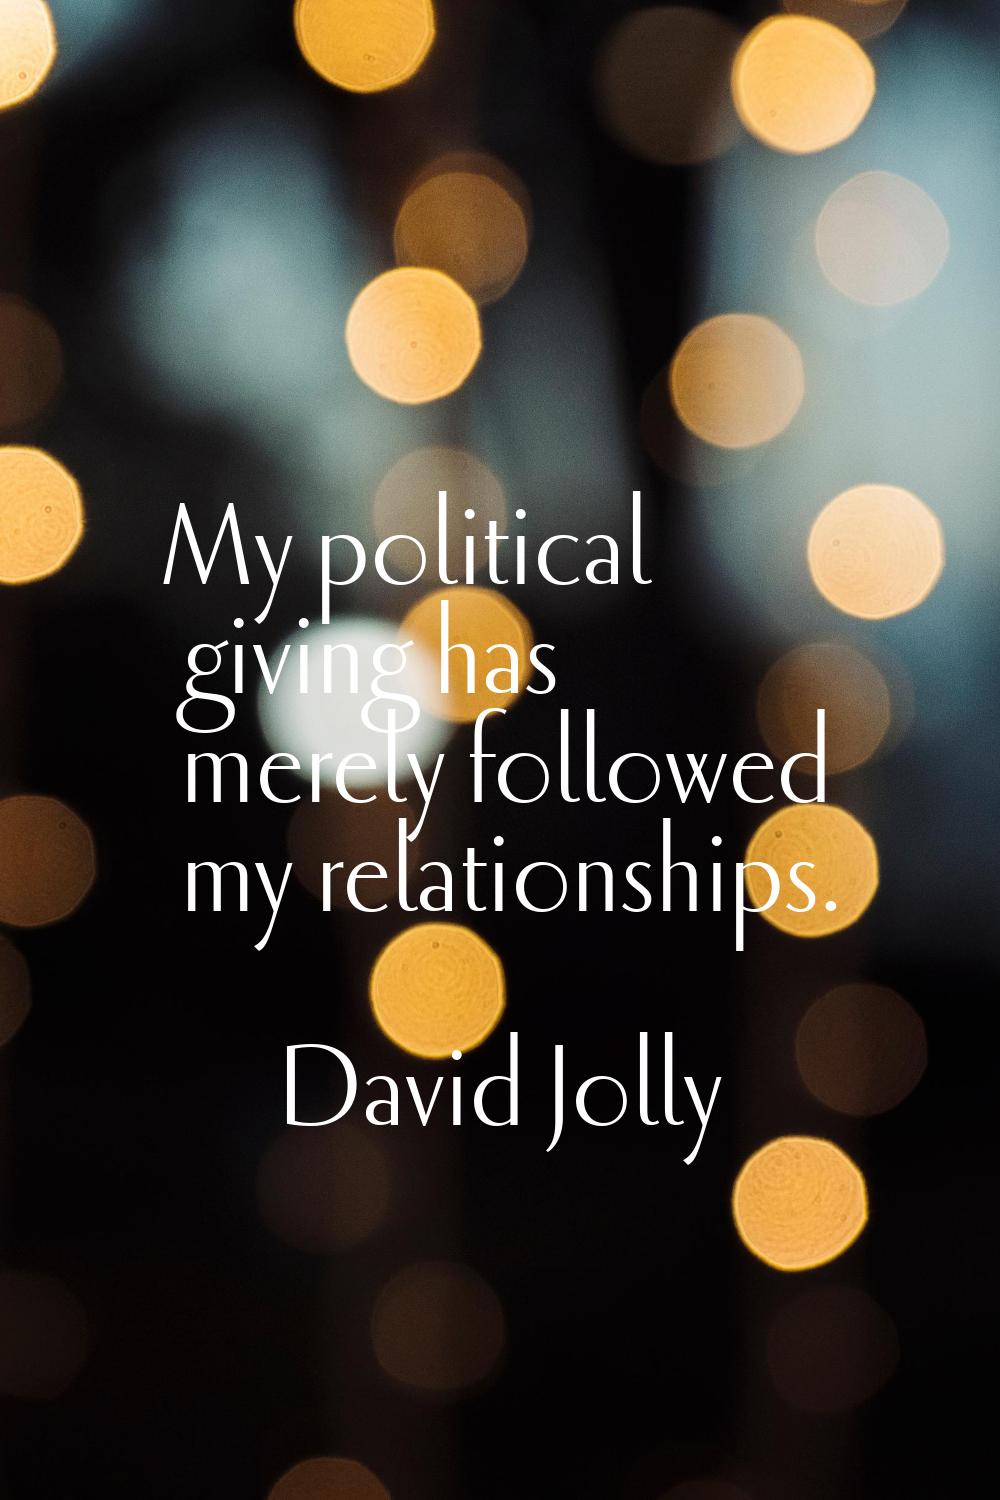 My political giving has merely followed my relationships.